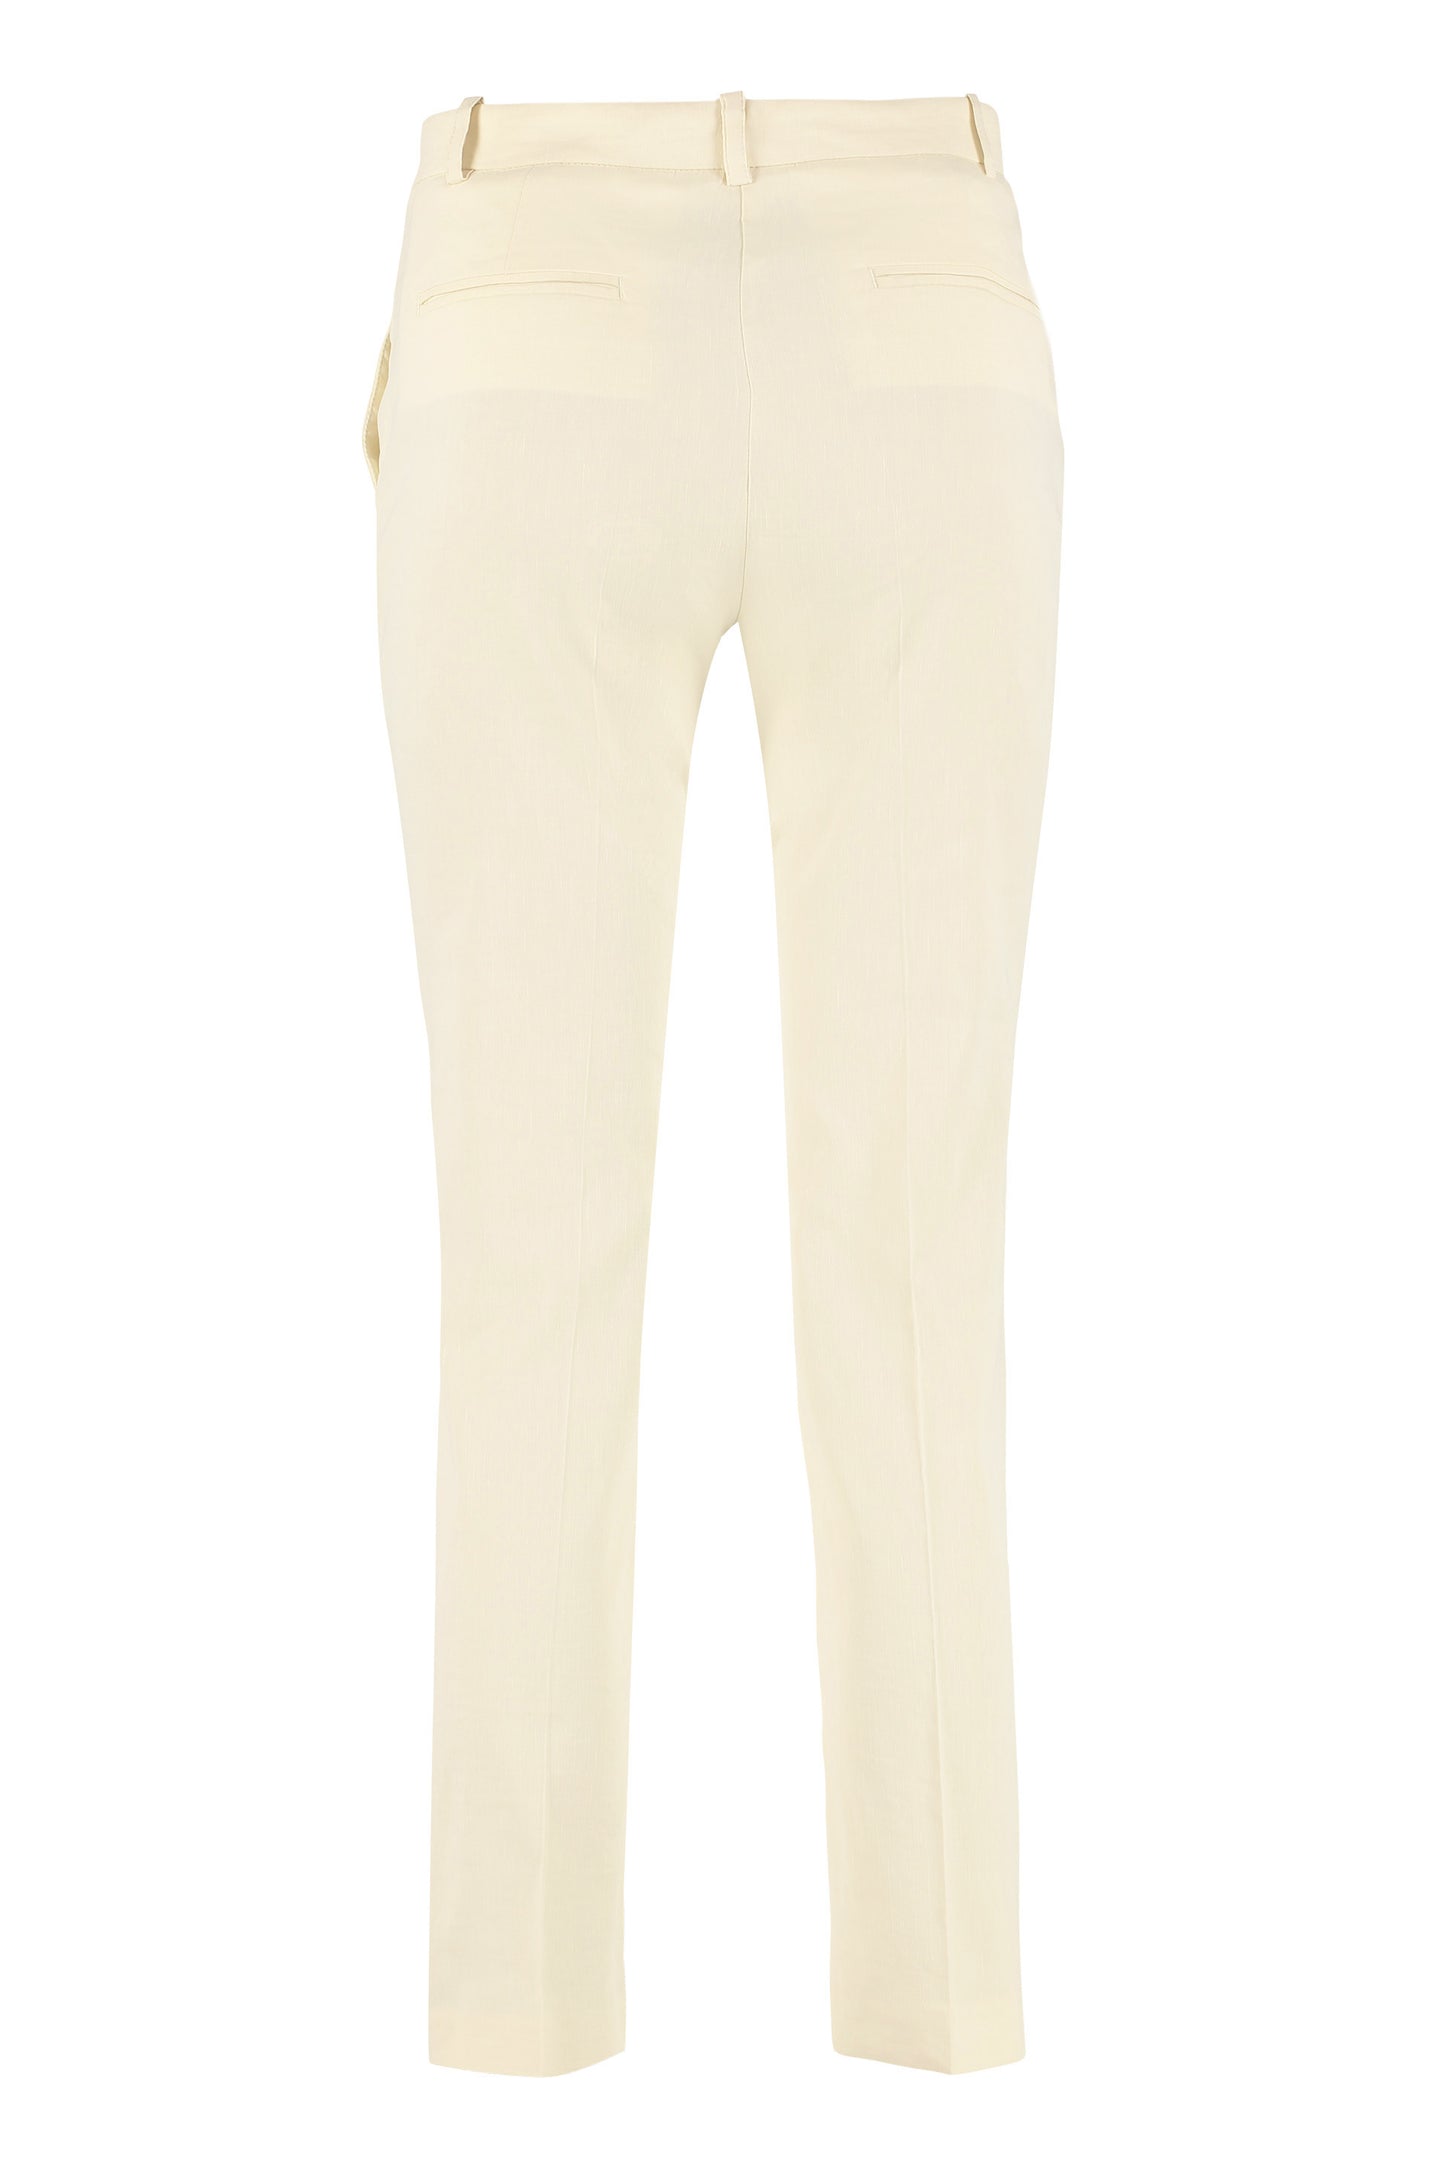 Bello 86 tailored trousers